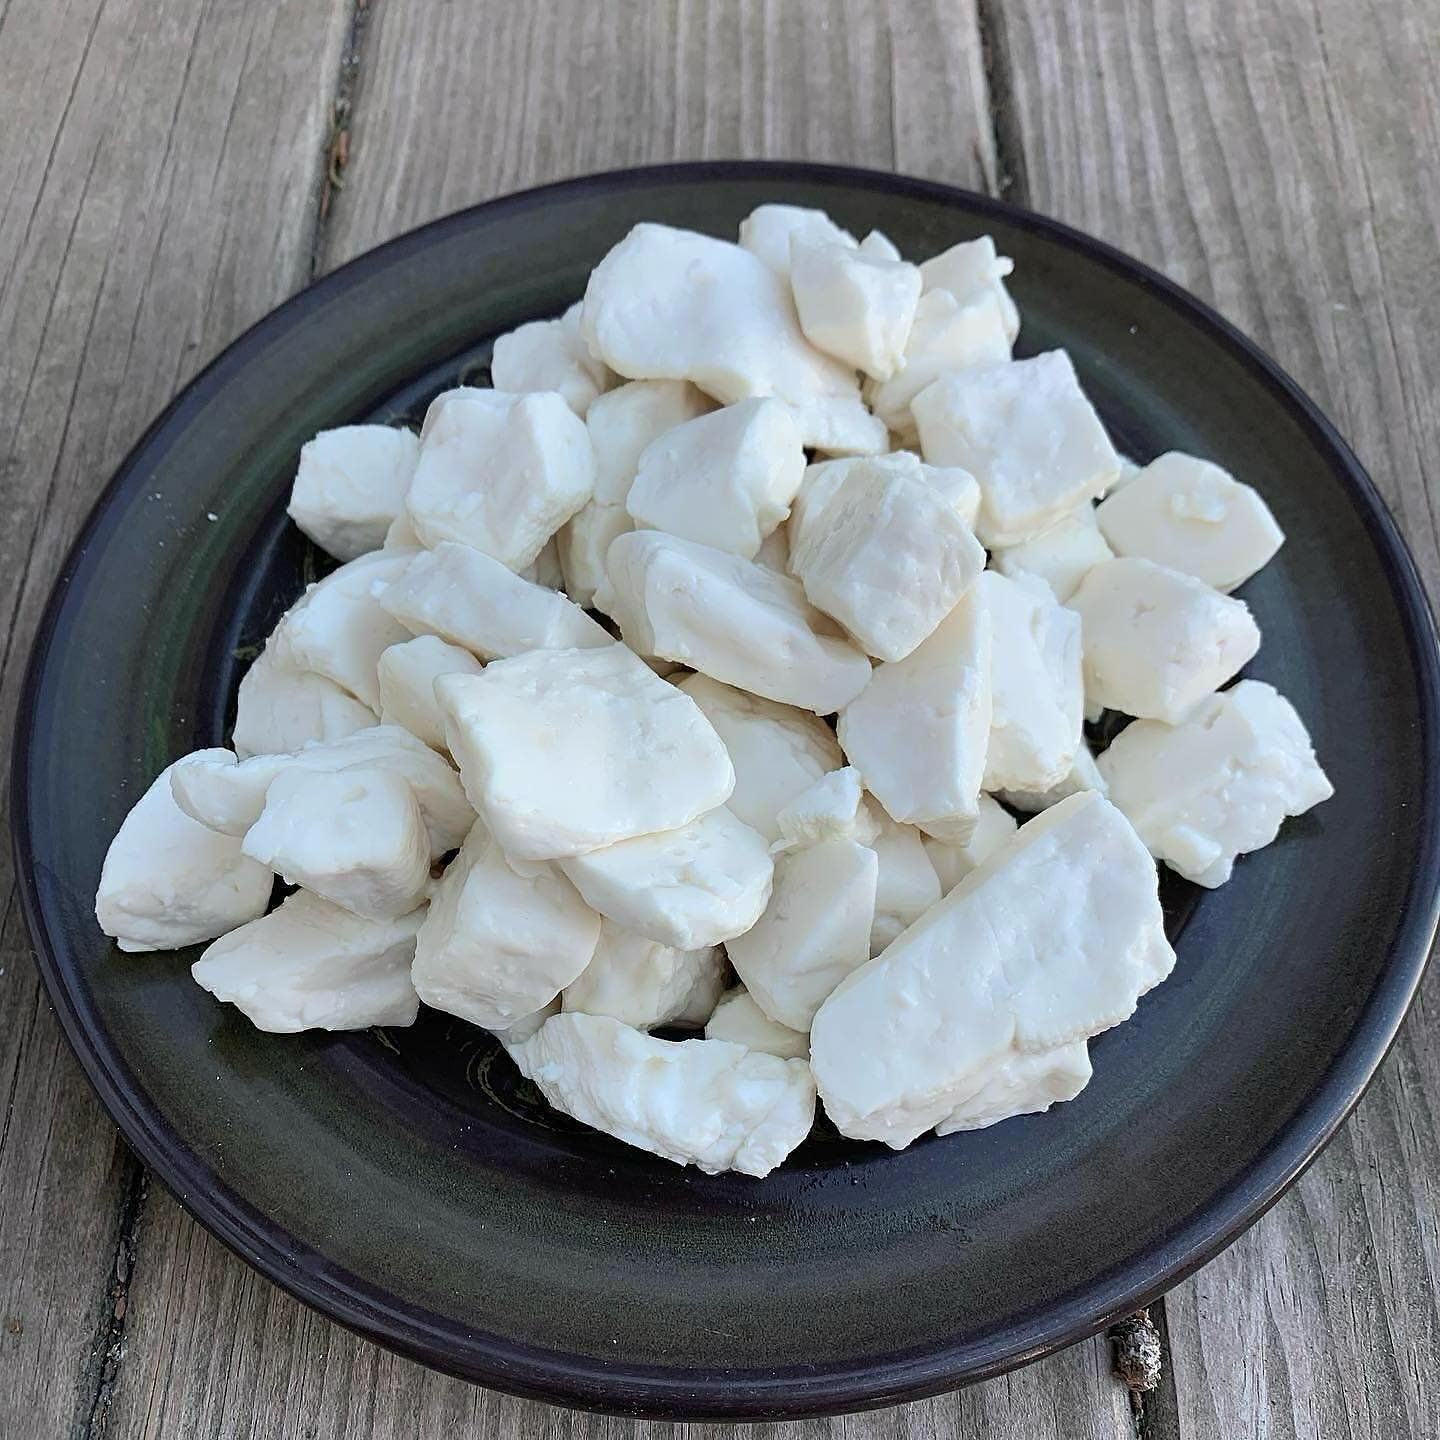 It&rsquo;s time for fresh cheese curds again! 🧀

I&rsquo;m making a batch on Friday. Ready for pick up at the farm after 2:30.

Original, Garlic, Ranch, Everything bagel, and Dill. First come, first serve. 
Comment your order below or send me a mess